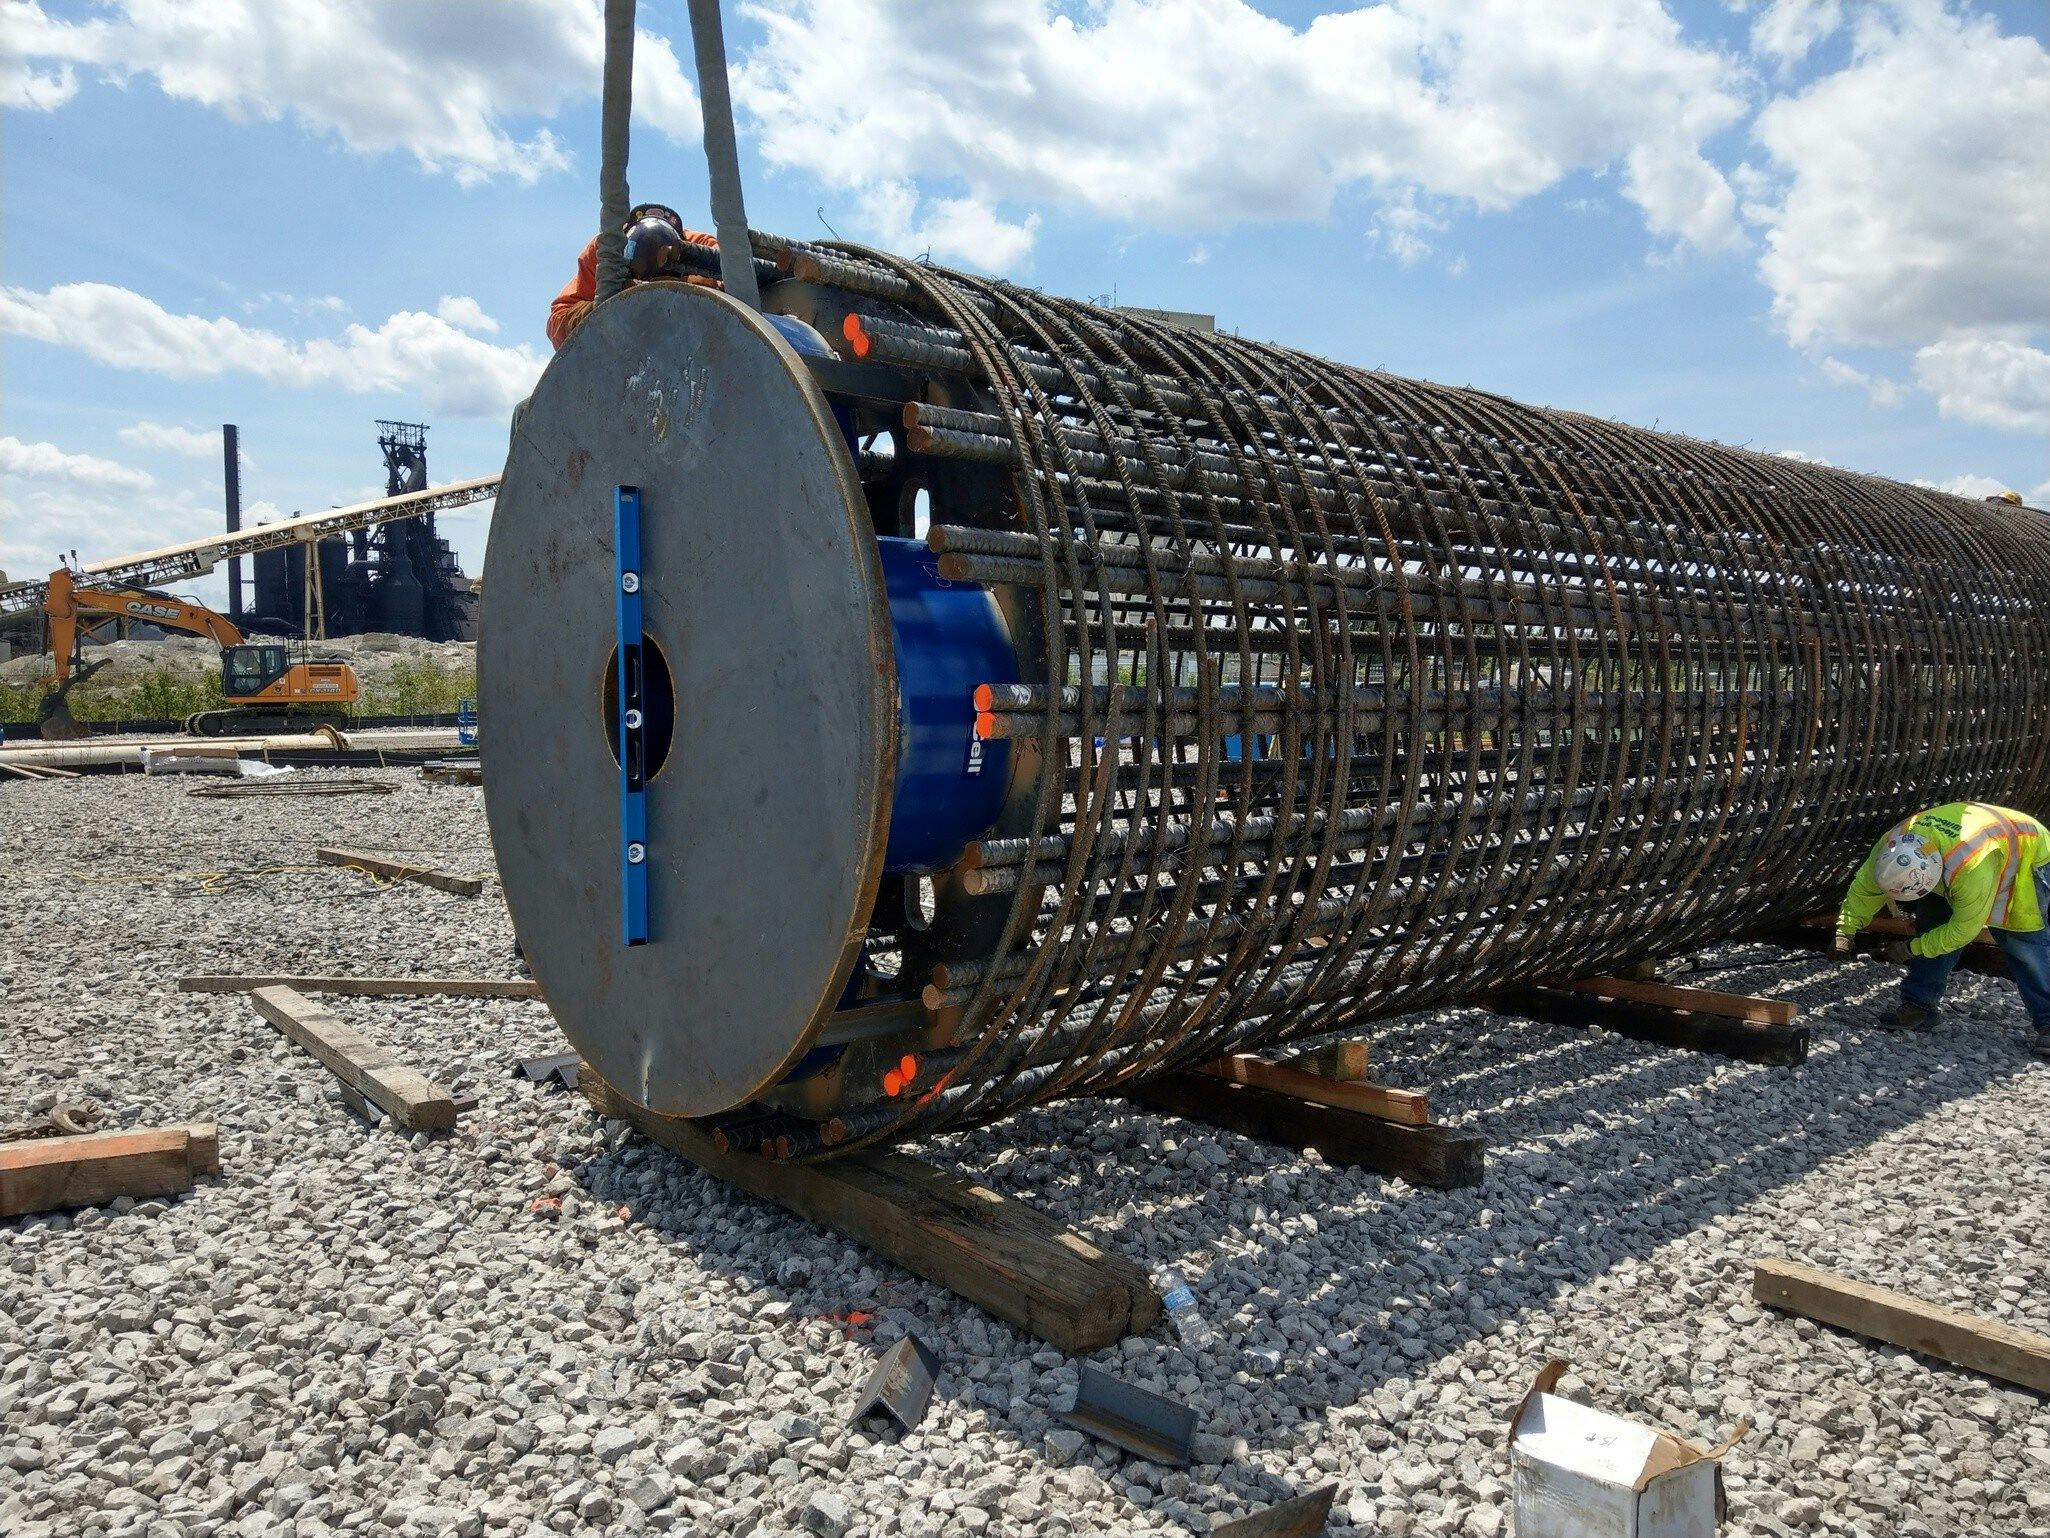 O-cell® (Osterberg Cell) bi-directional static load testing – simultaneously perform a full scale static loading test on two sections of the same foundation significantly reducing testing costs and improving safety by eliminating the need for kentledge, reaction piles and reaction beams. Test loads of 3MN to over 300 MN can be applied safely within the foundation element